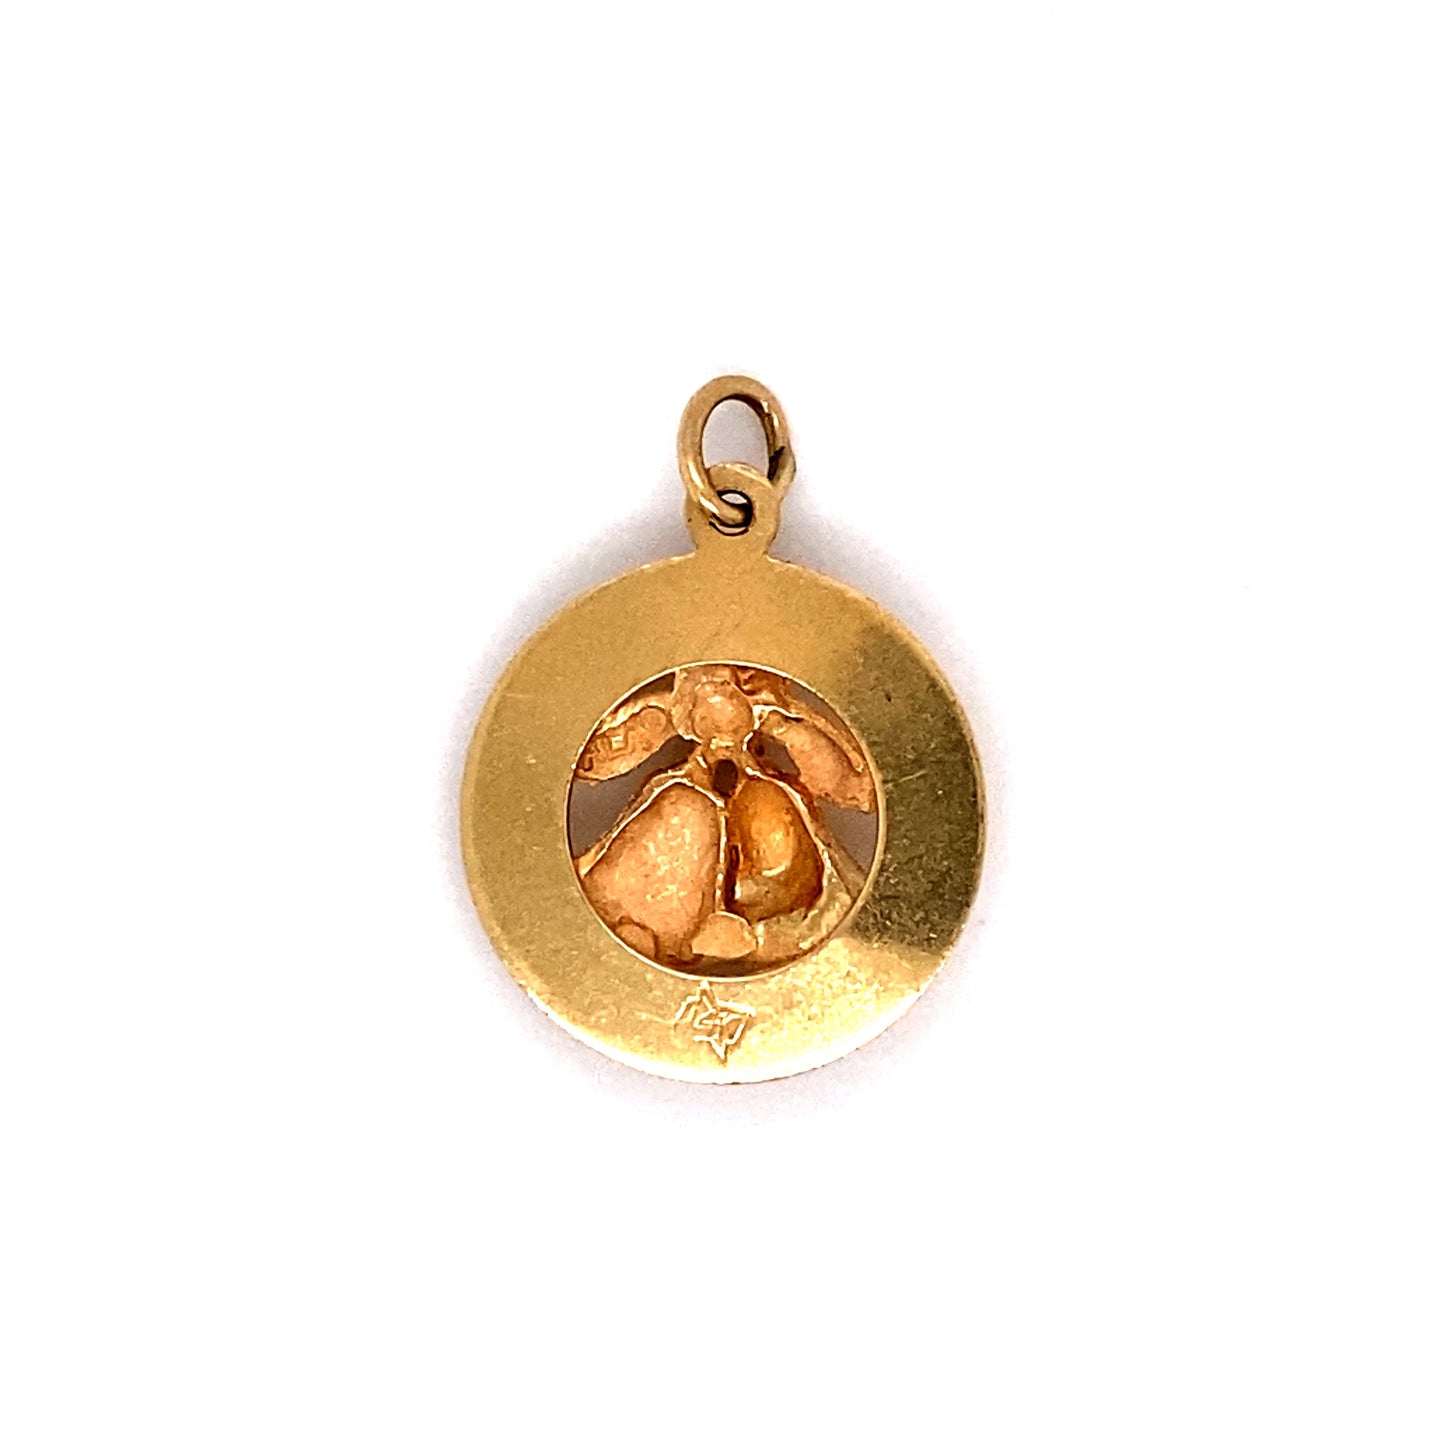 Vintage 1980s Gemstone "Merry Christmas" Bell Charm in 14k Gold